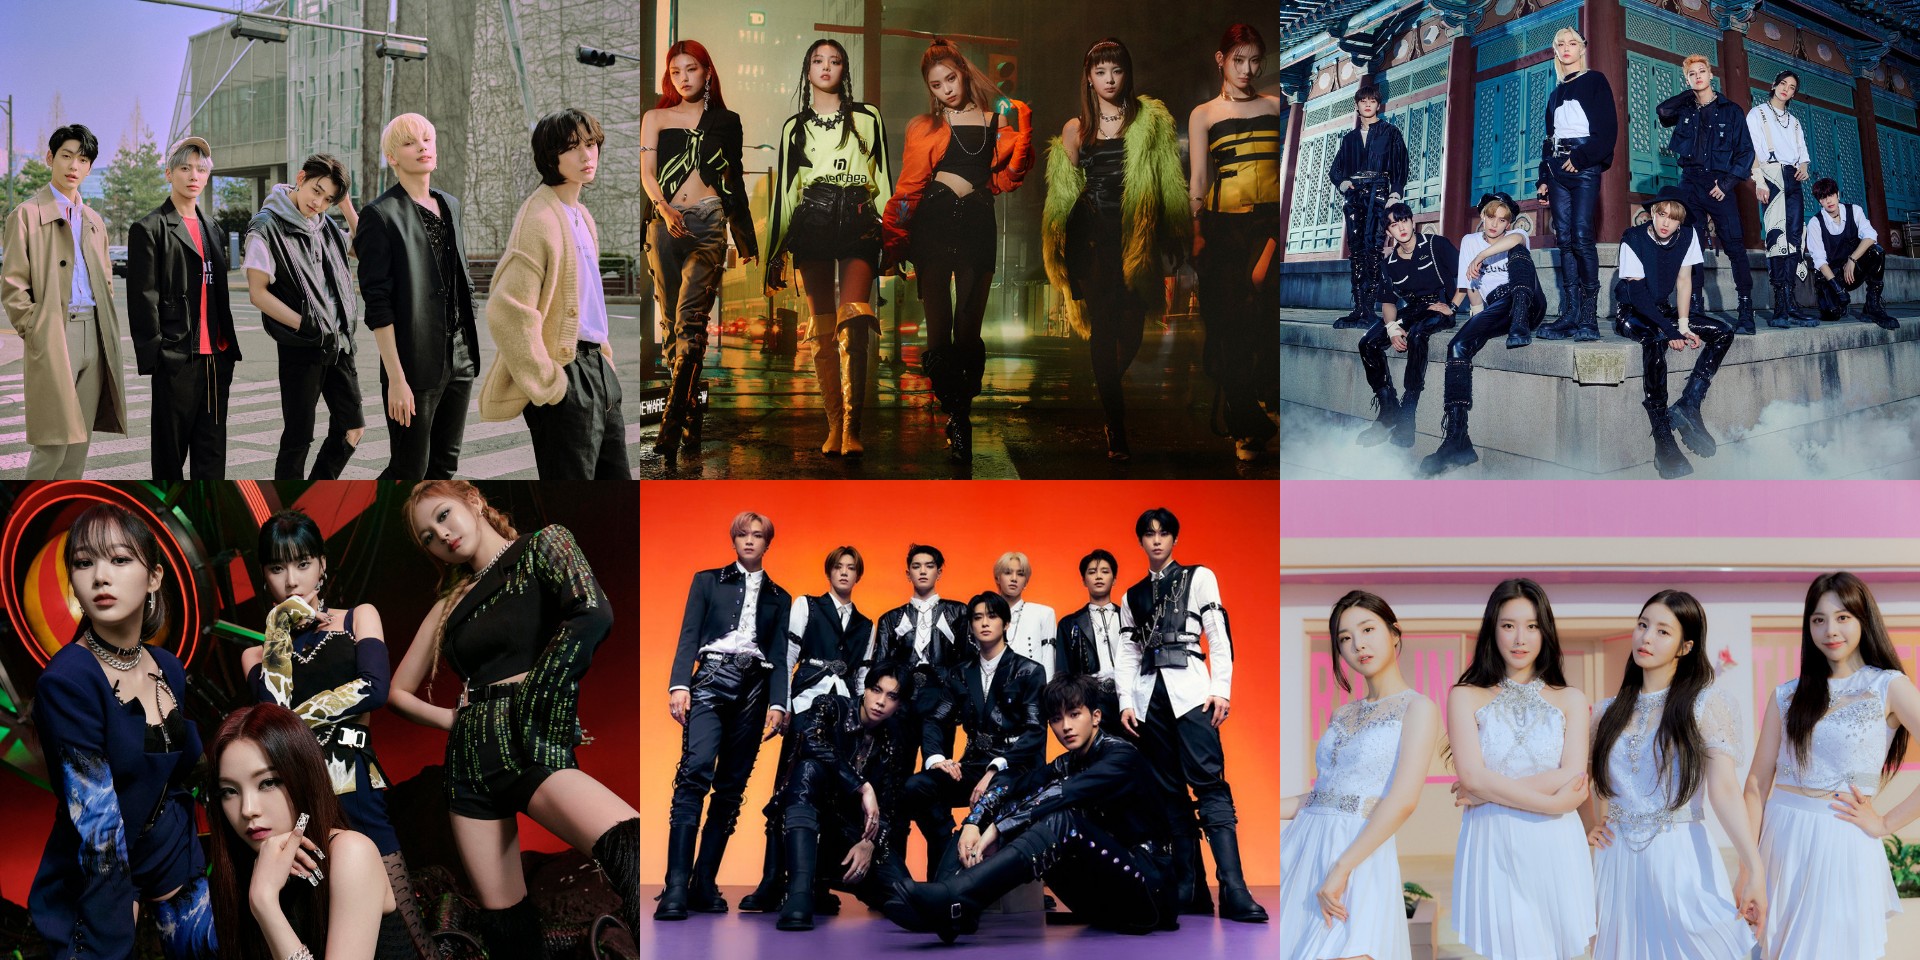 2021 Mnet Asian Music Awards announce lineup – TXT, aespa, Stray Kids, ITZY, NCT 127, Brave Girls, and more